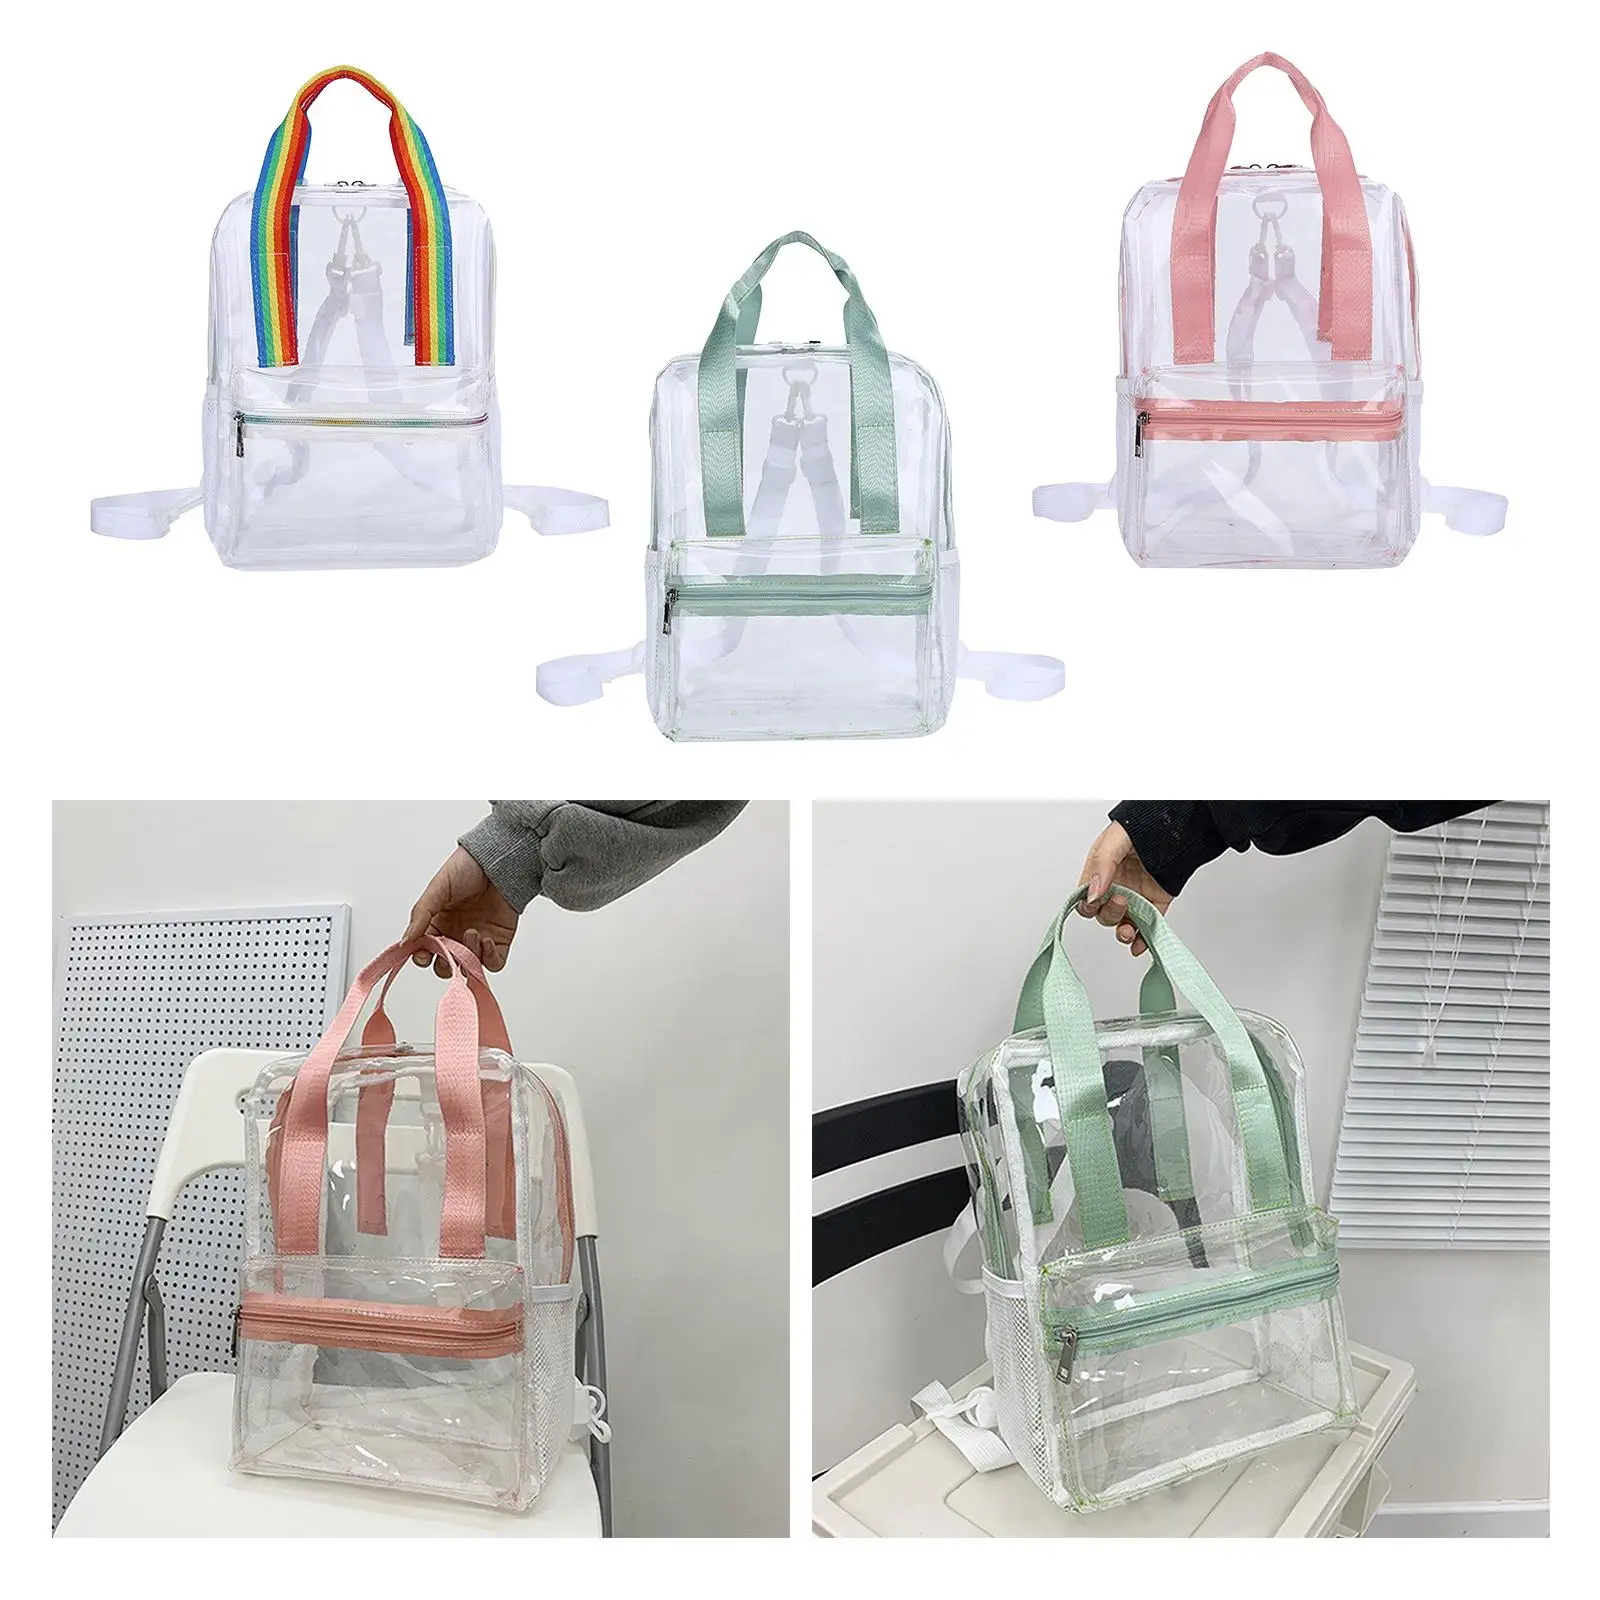 PVC Clear Backpack School Transparent Back Bag for Camping Hiking Sports